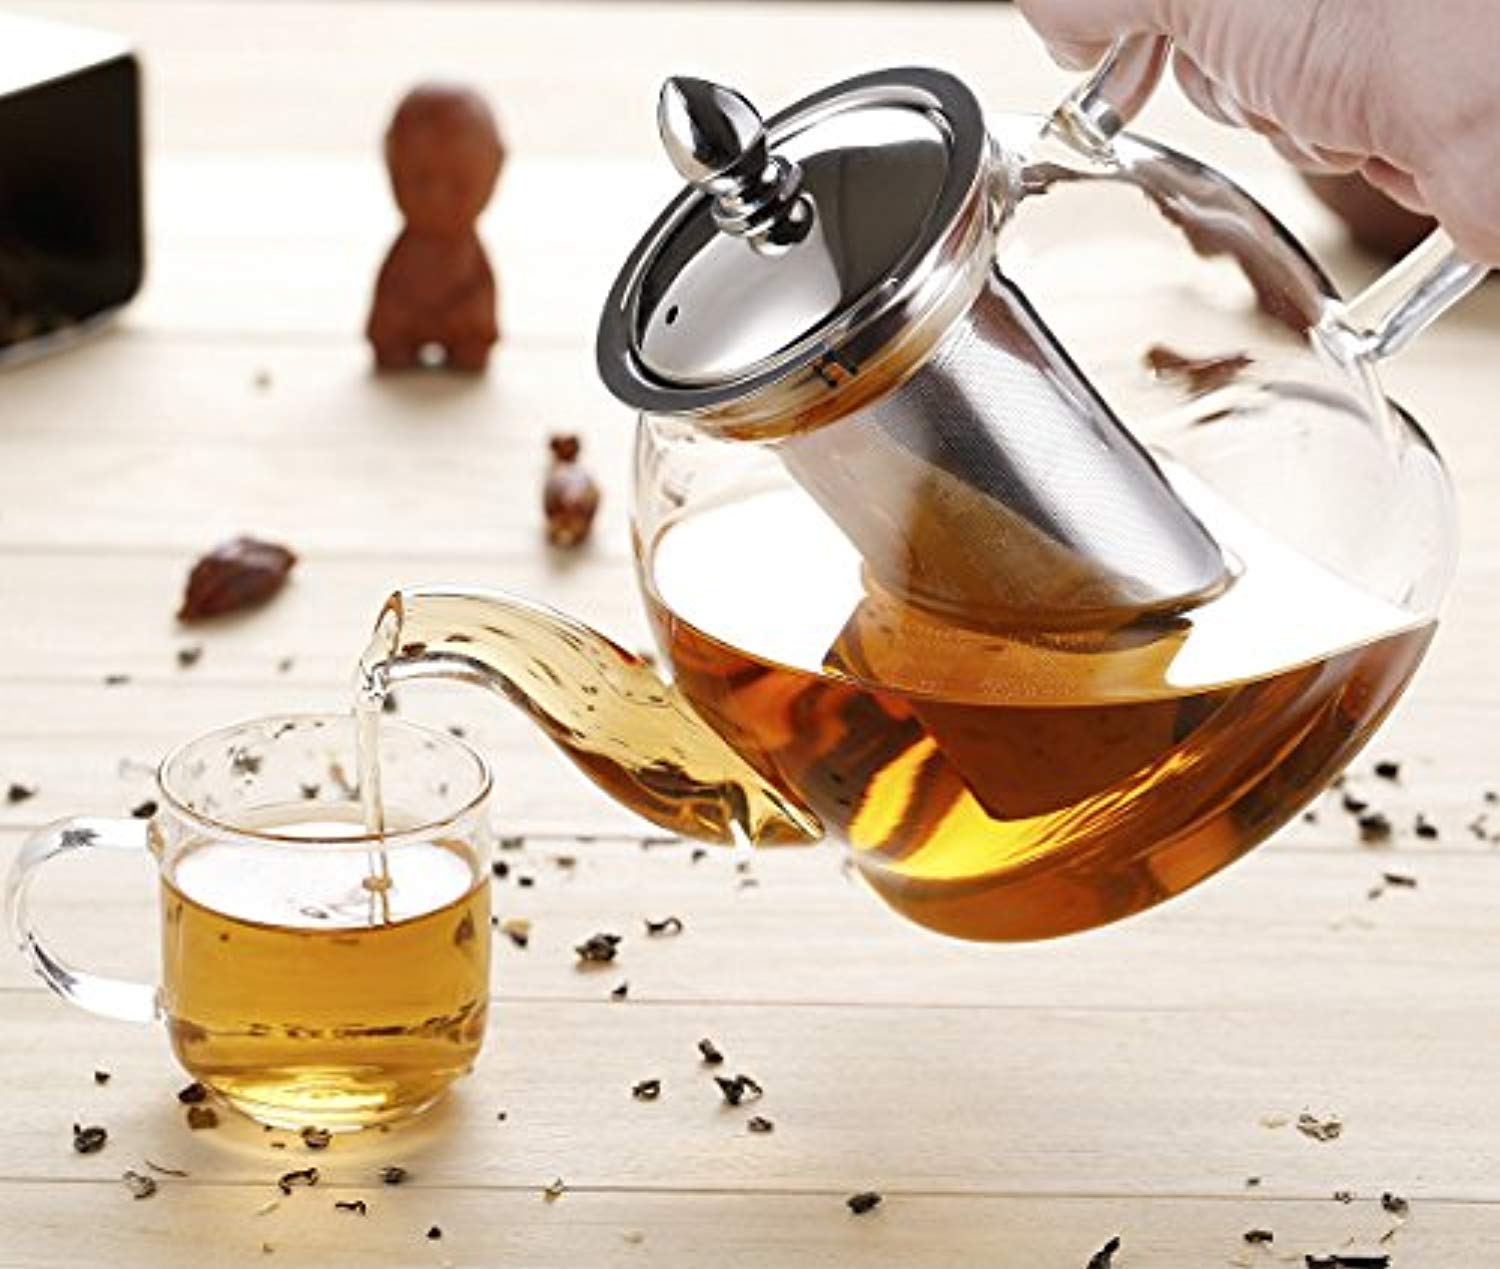 Hiware HIWARE Good Glass Teapot with Stainless Steel Infuser & Lid, Borosilicate  Glass Tea Kettle Stovetop Safe, Blooming & Loose Leaf